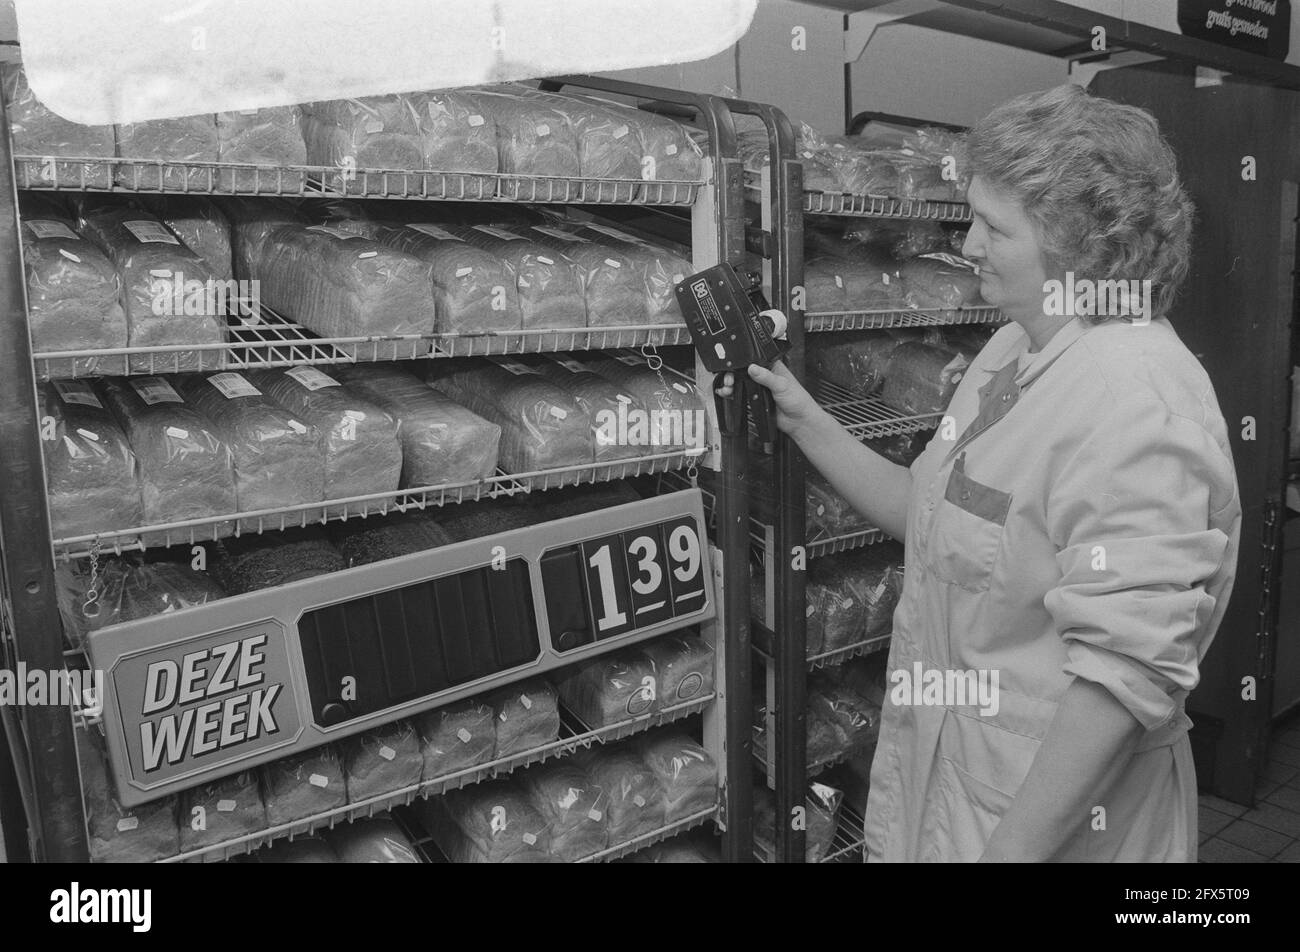 Cheap battle bread in Albert Heijn, June 29, 1987, The Netherlands, 20th century press agency photo, news to remember, documentary, historic photography 1945-1990, visual stories, human history of the Twentieth Century, capturing moments in time Stock Photo